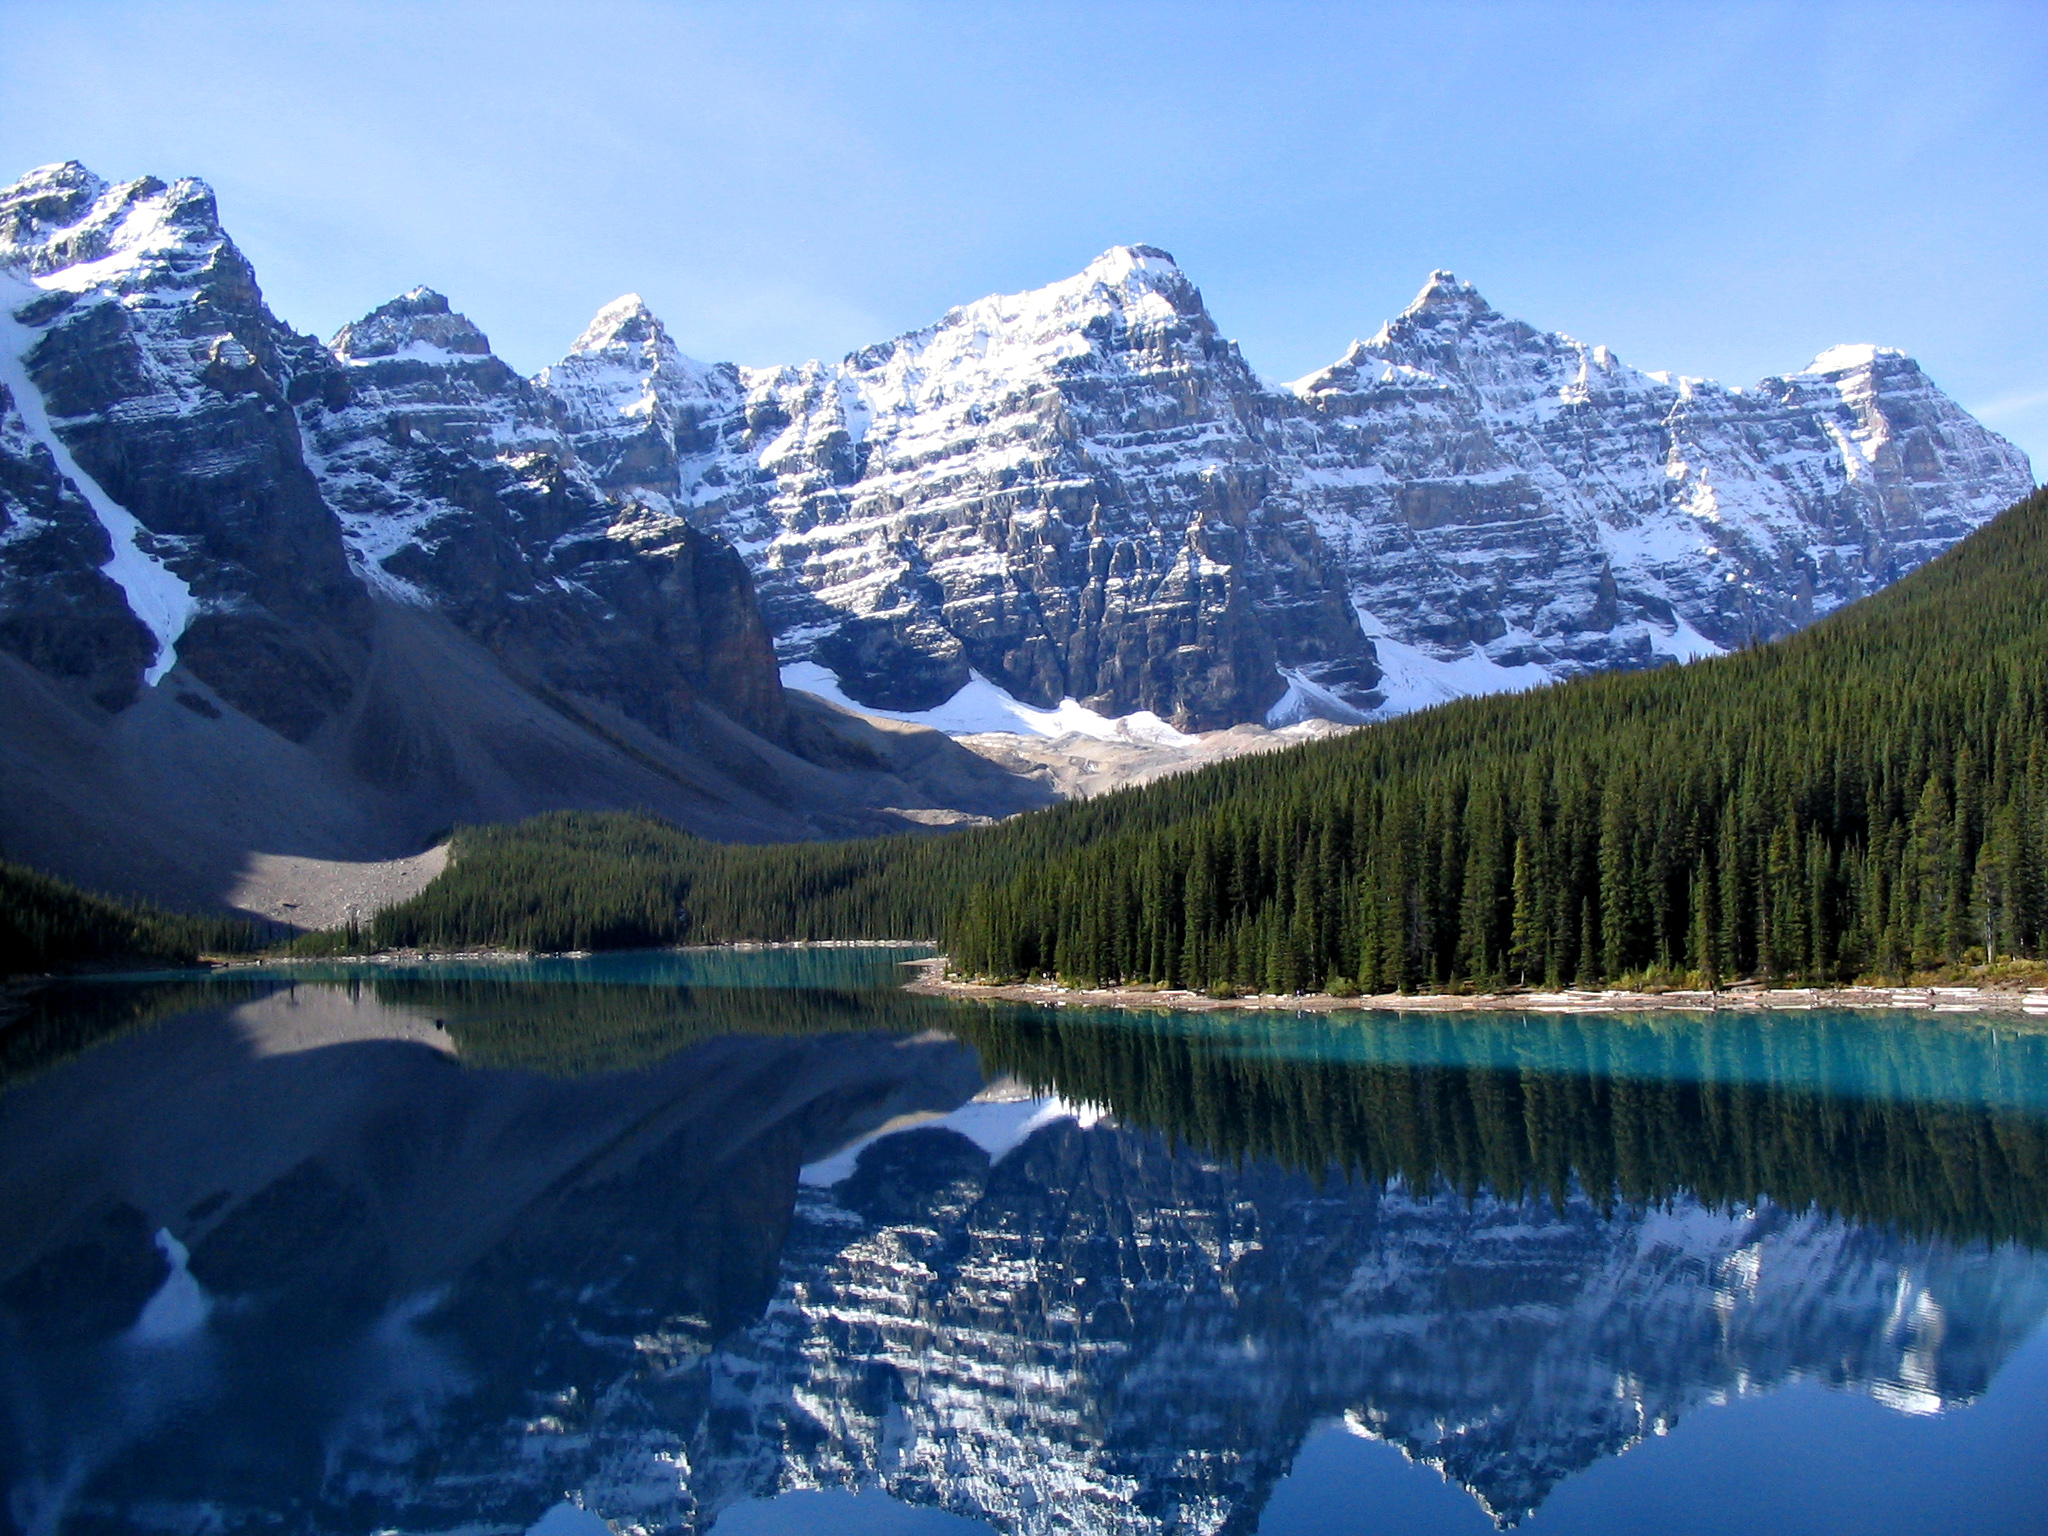 Beholding life-changing vistas like Moraine Lake in the Canadian Rockies is just one of the top reasons to visit Canada!